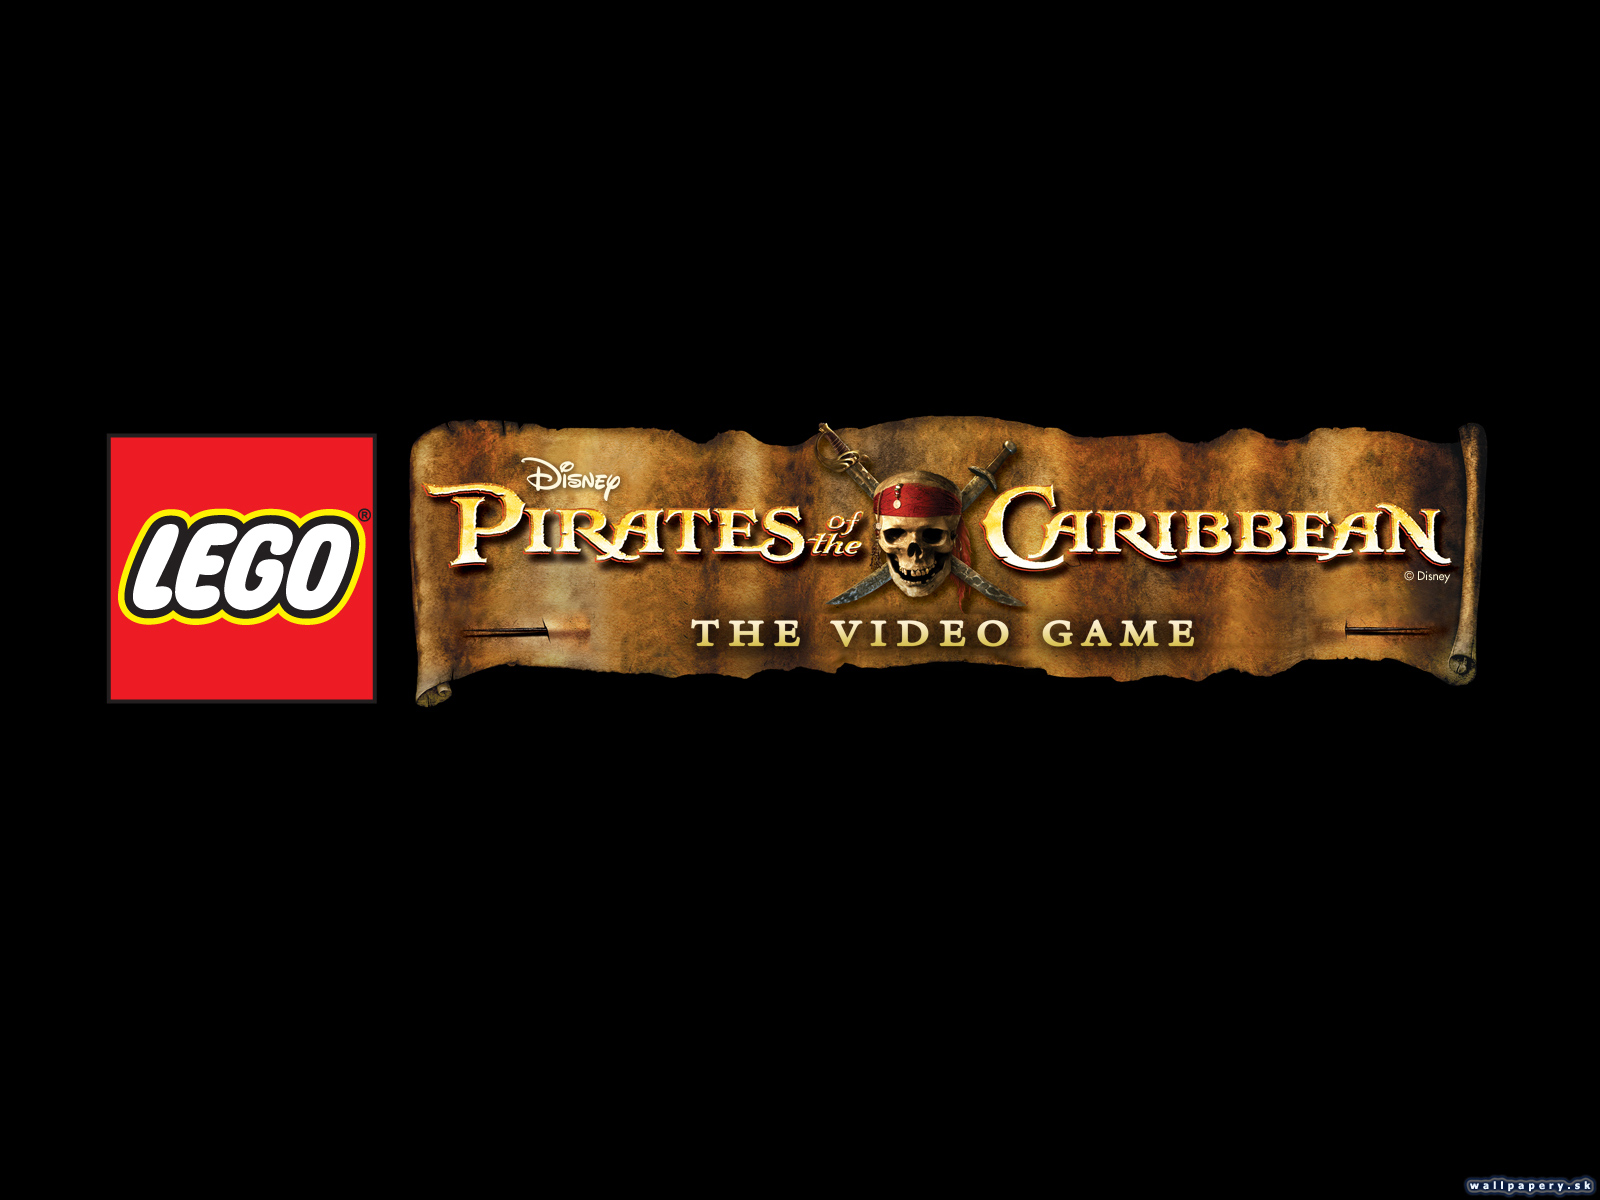 Lego Pirates of the Caribbean: The Video Game - wallpaper 7